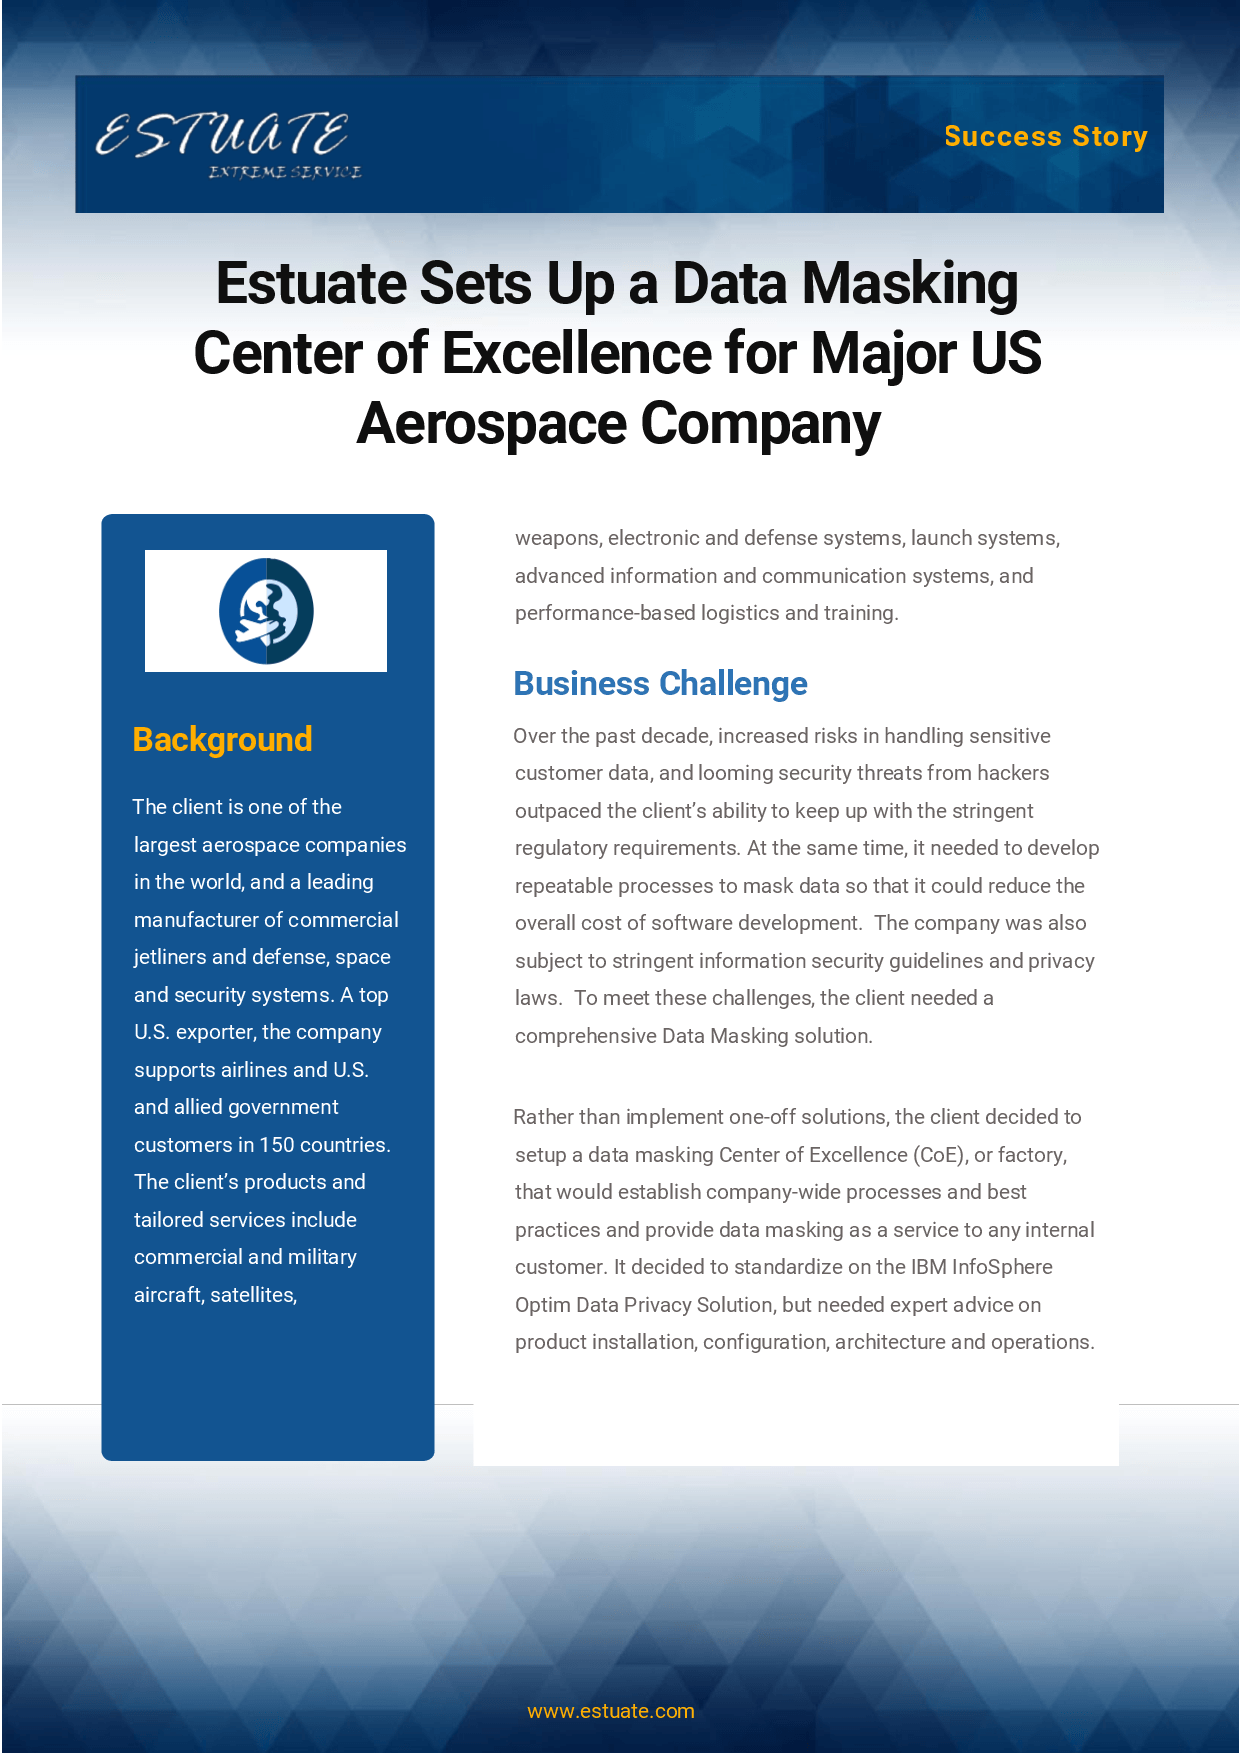 Us Aerospace Company Logo - Estuate Sets Up a Data Masking Center of Excellence for Maj